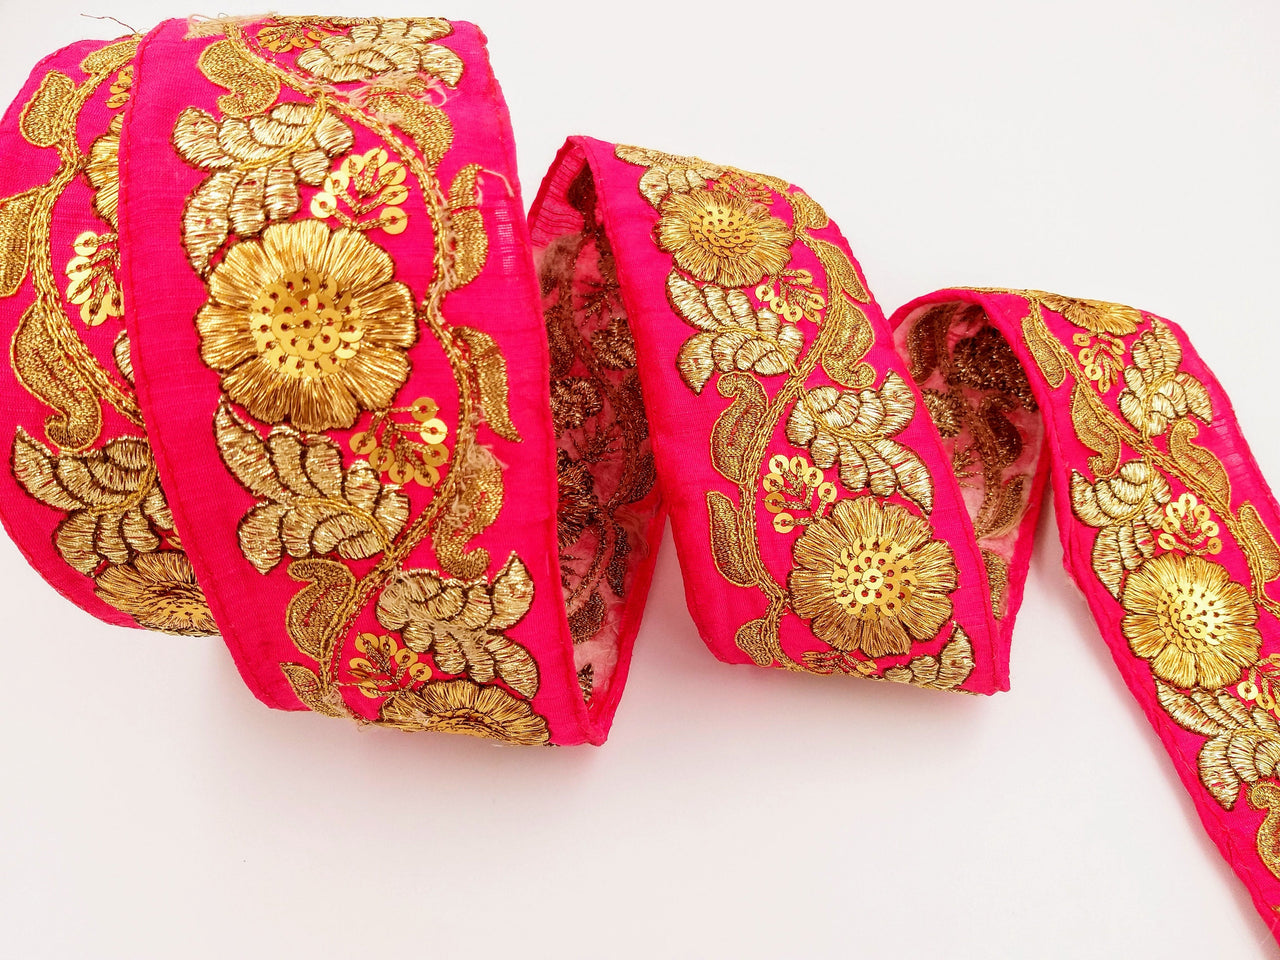 Fuchsia Pink Art Silk Trim In Gold Floral Embroidery, Gold Embroidered Flowers Border, Floral Trim